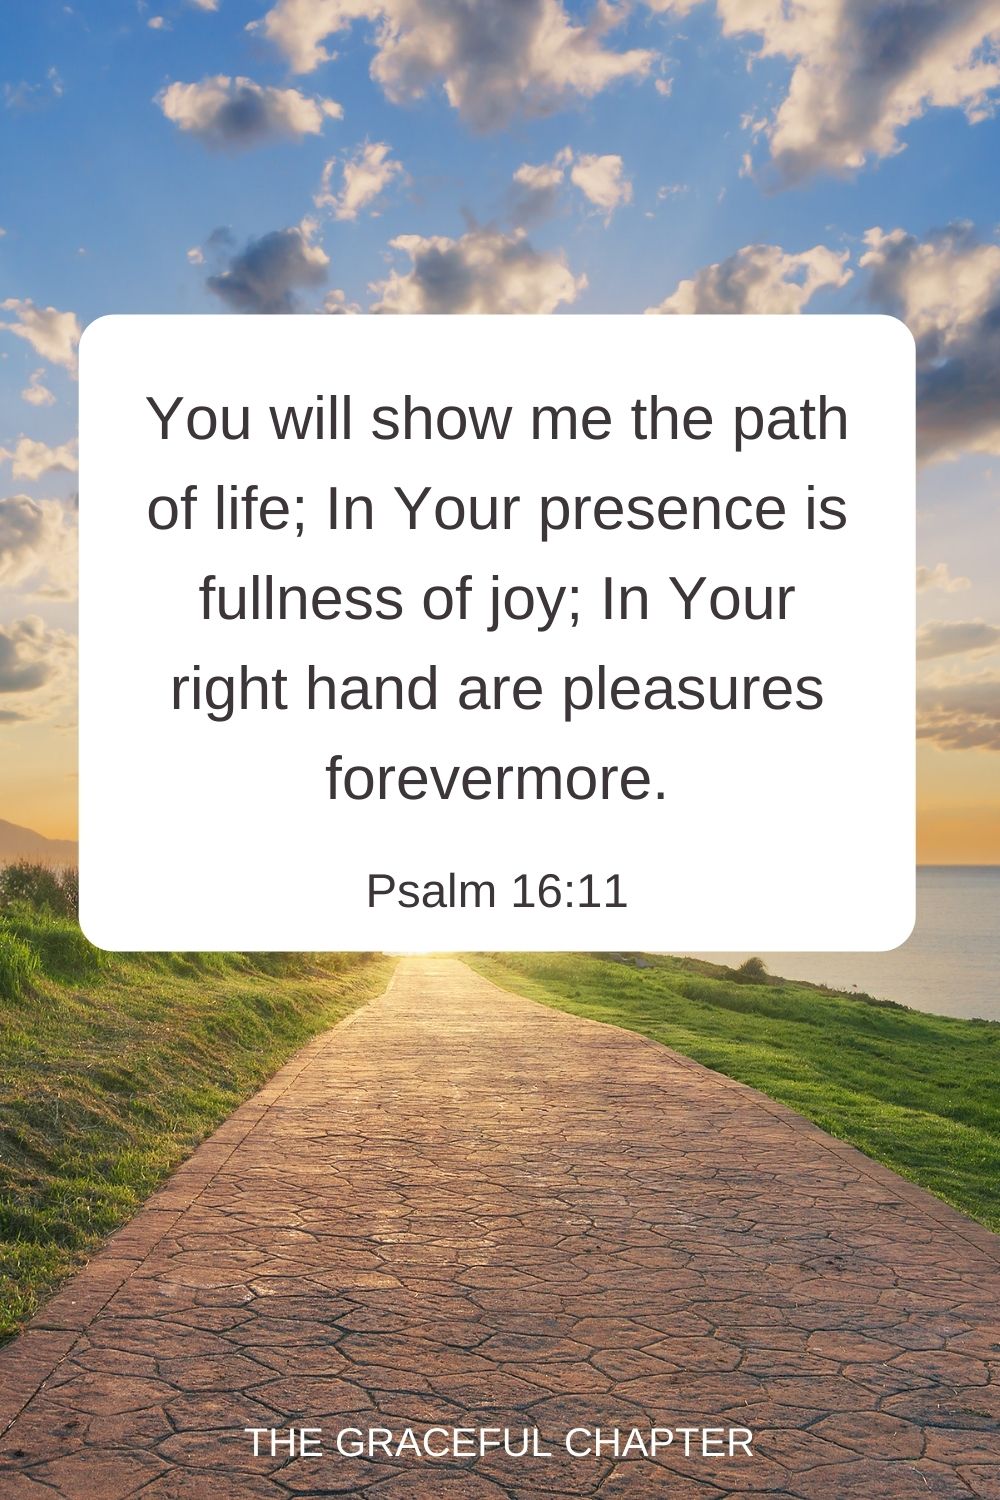 You will show me the path of life; In Your presence is fullness of joy; In Your right hand are pleasures forevermore. Psalm 16:11